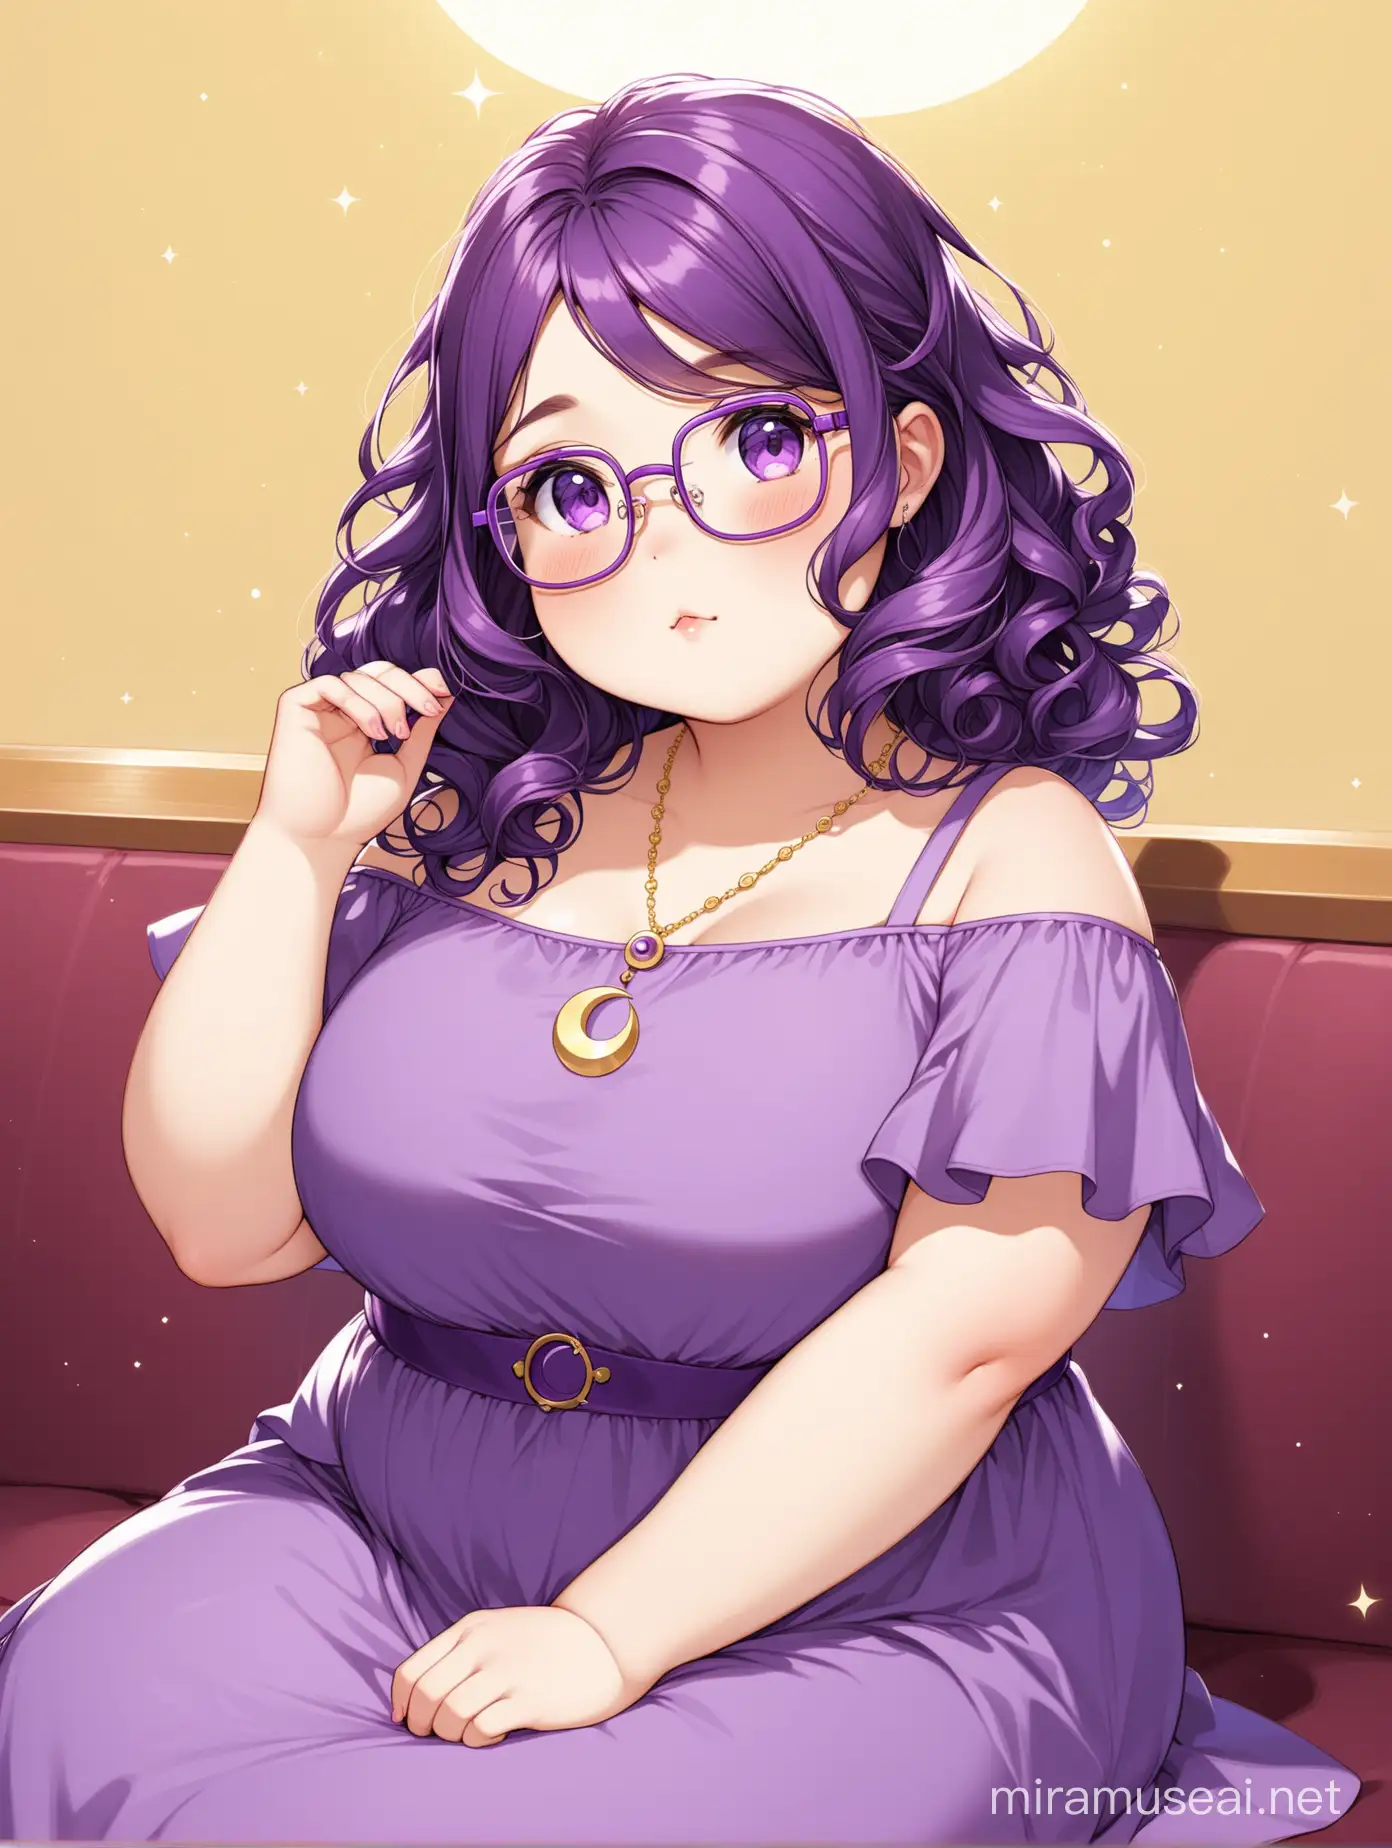 Adorable Curly PurpleHaired Girl with Square Glasses and Crescent Moon Necklace in Purple Dress